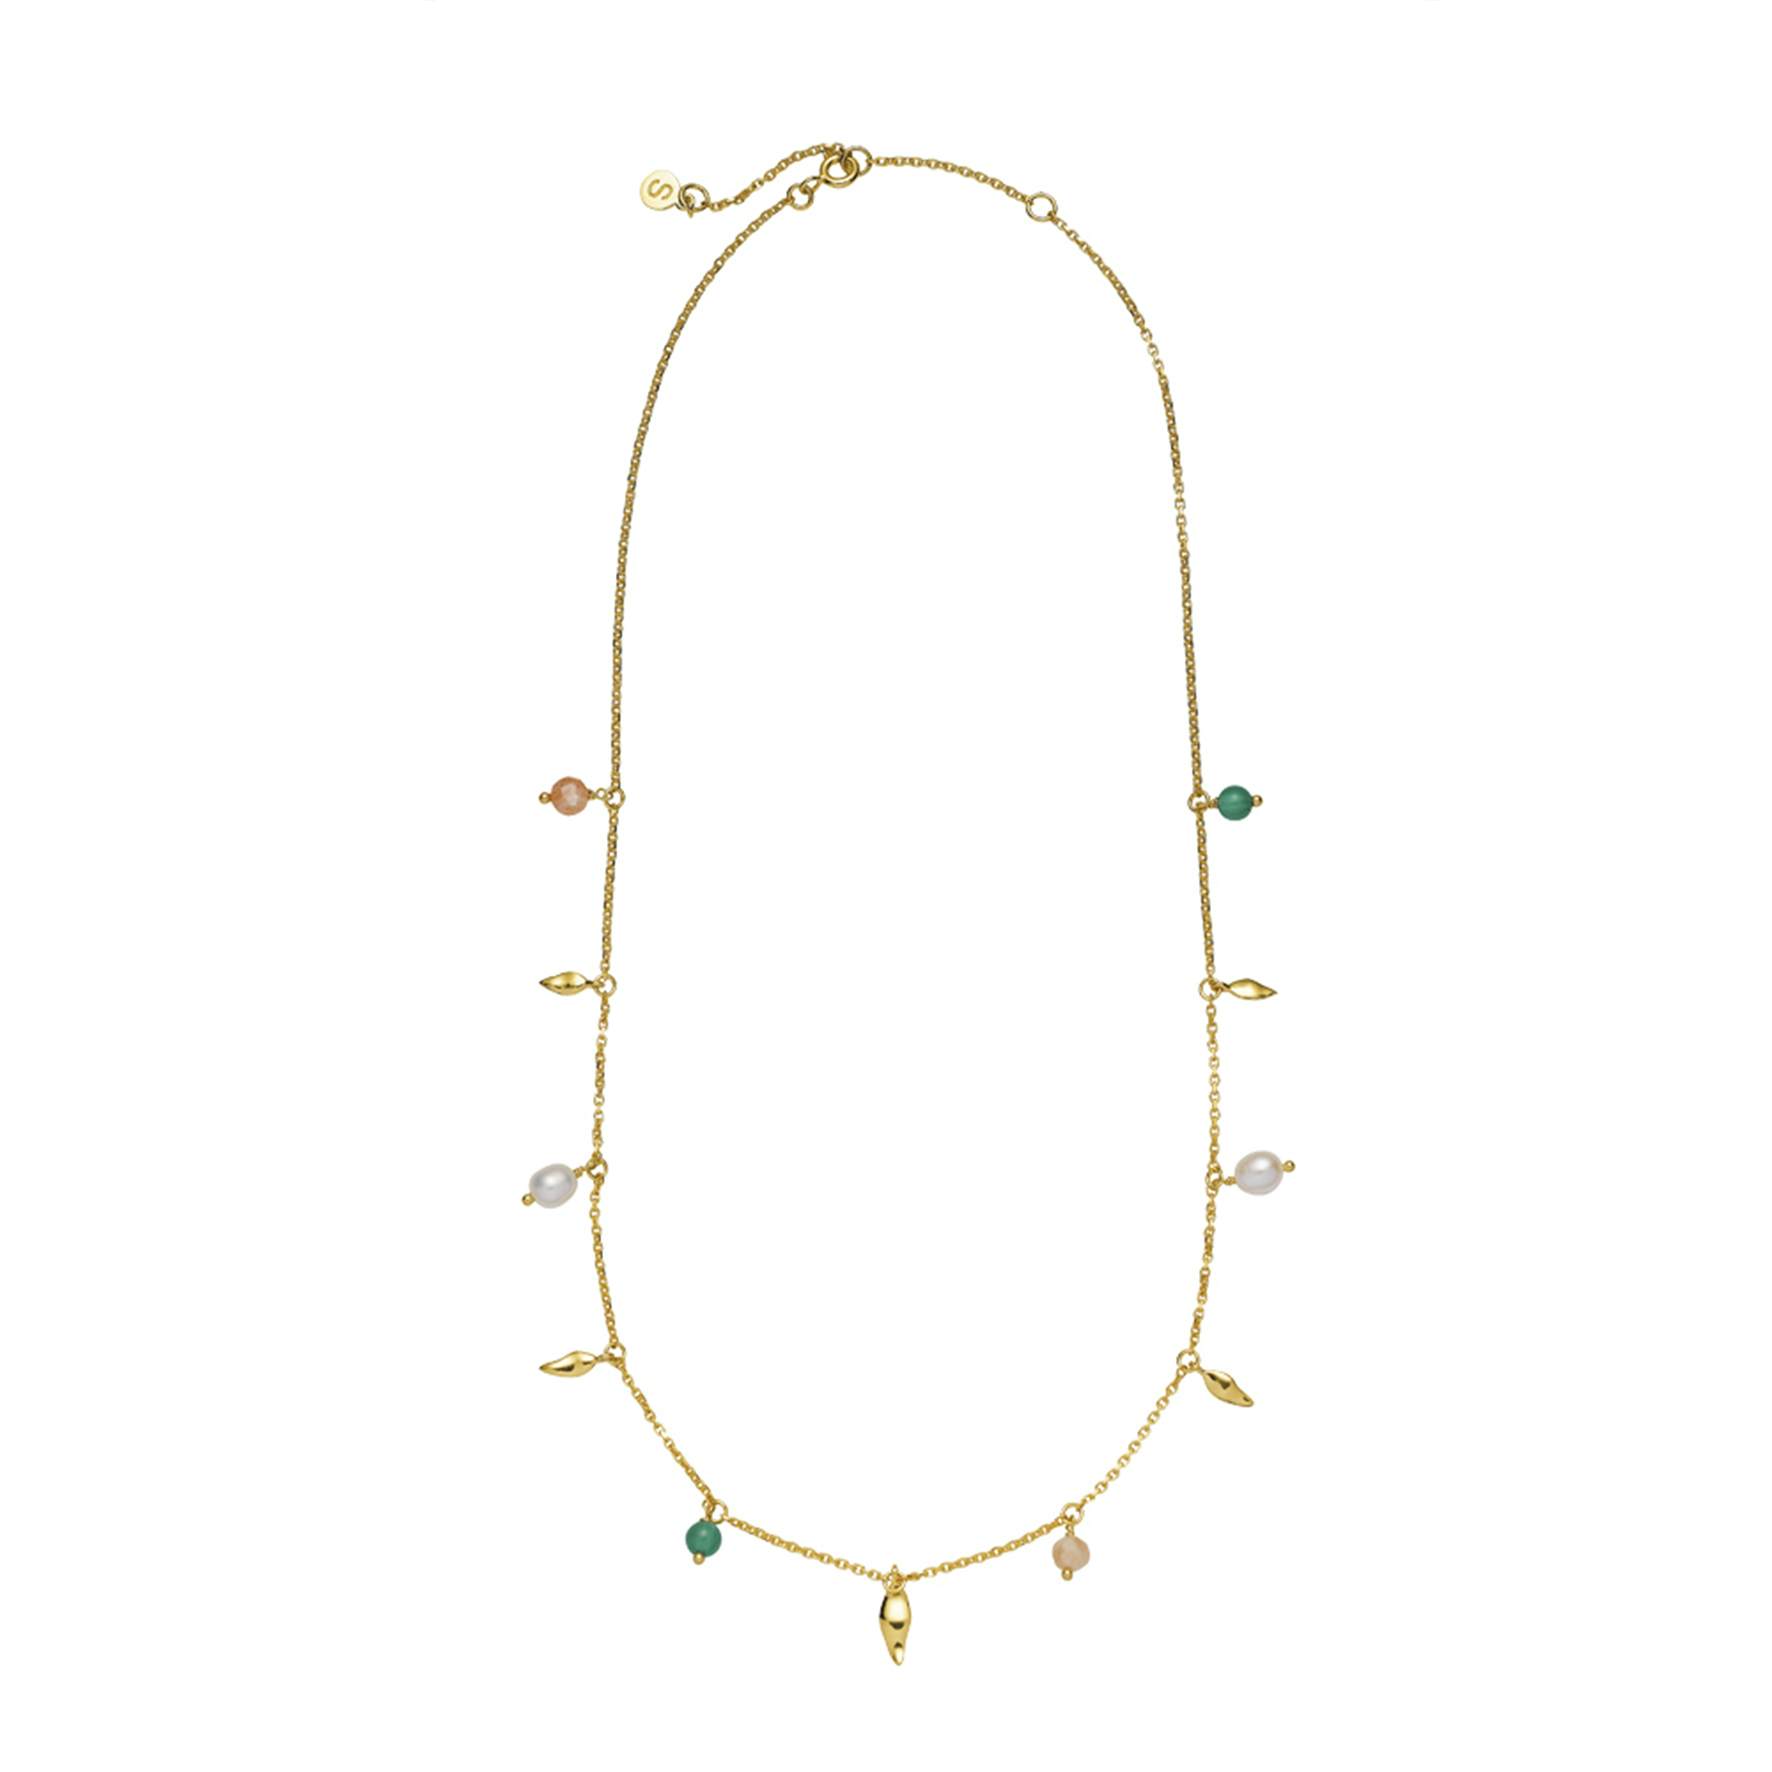 Mia by Sistie Necklace from Sistie in Goldplated-Silver Sterling 925